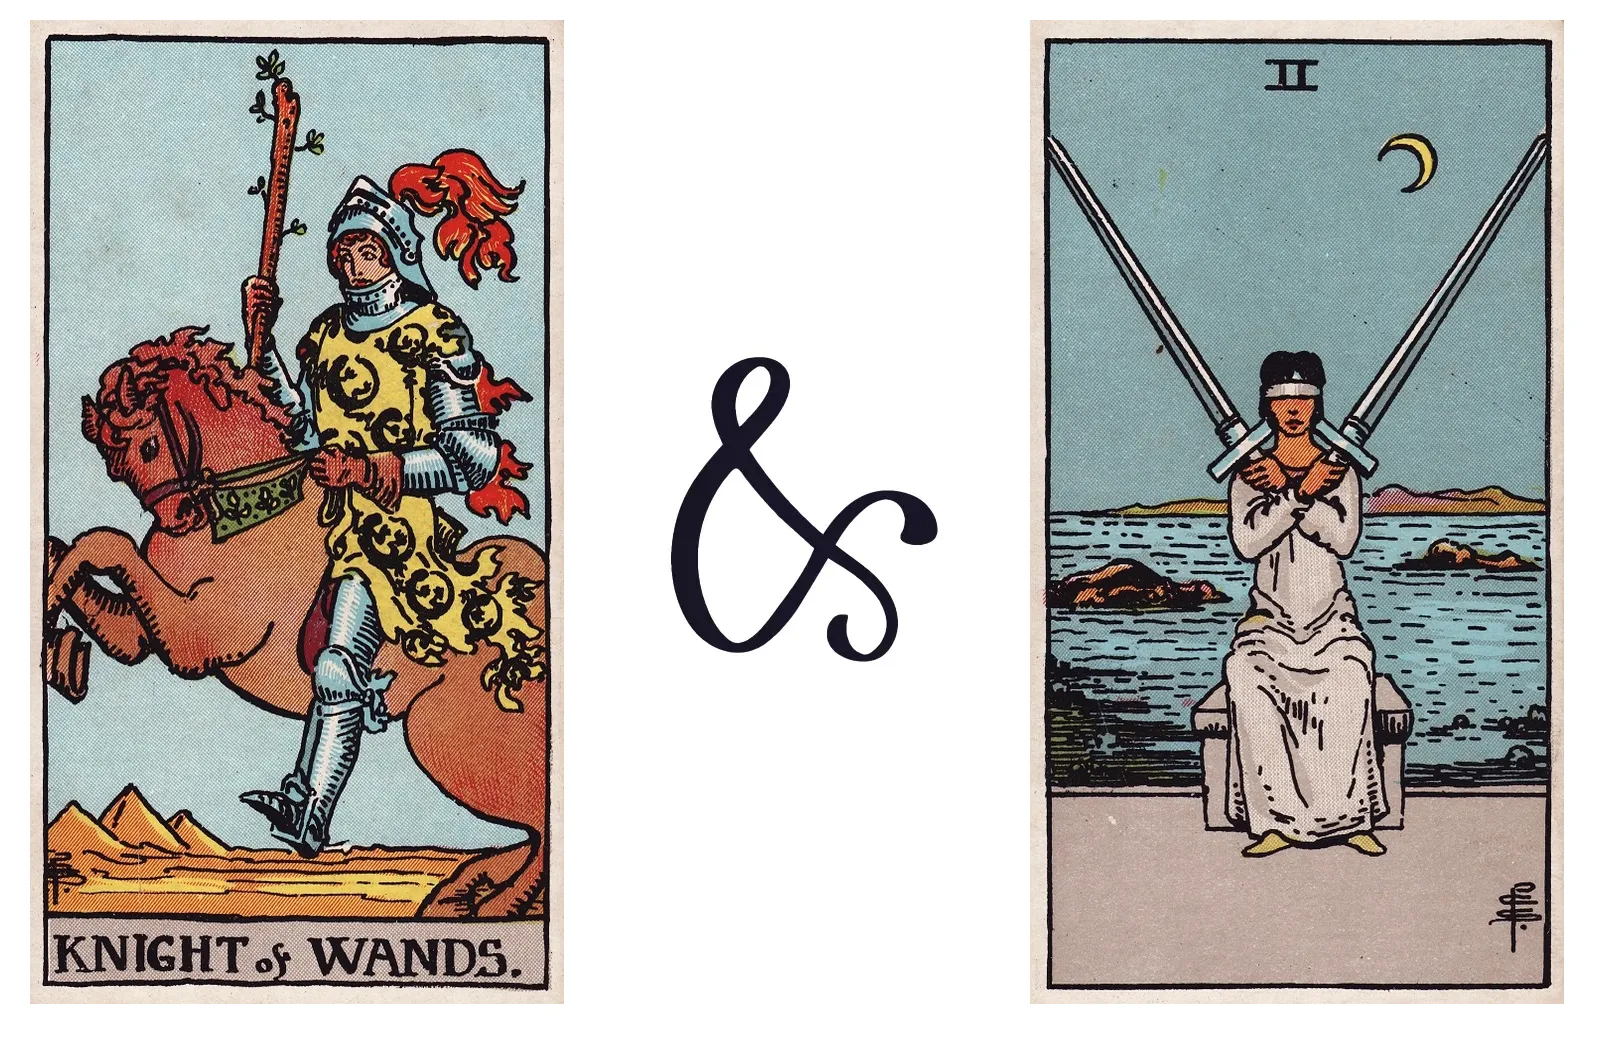 Knight of Wands and Two of Swords